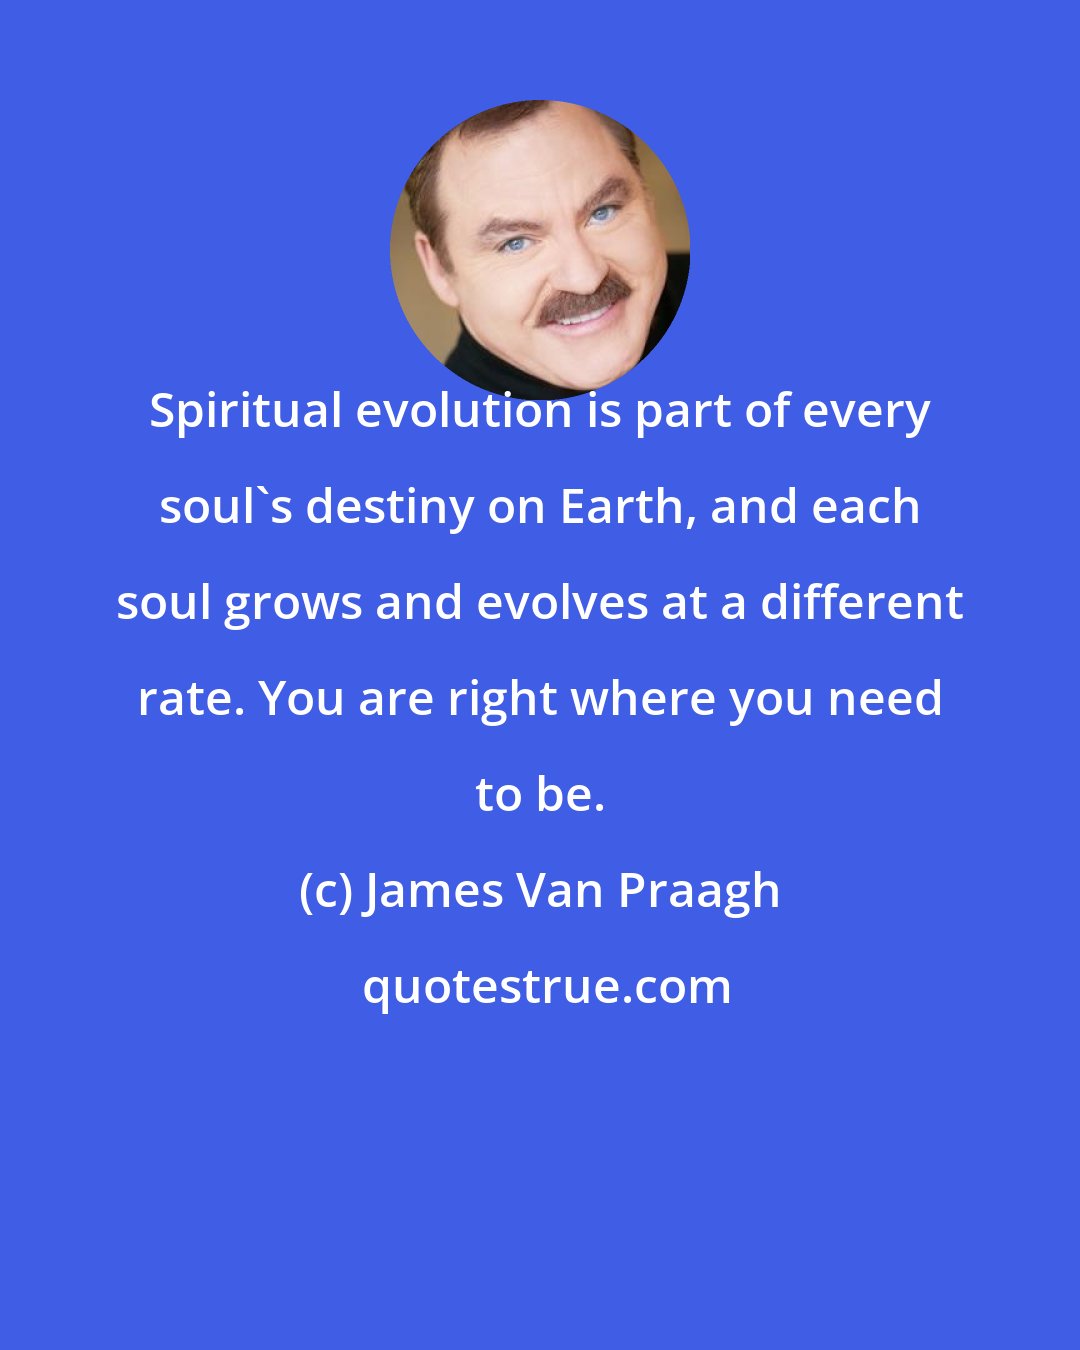 James Van Praagh: Spiritual evolution is part of every soul's destiny on Earth, and each soul grows and evolves at a different rate. You are right where you need to be.